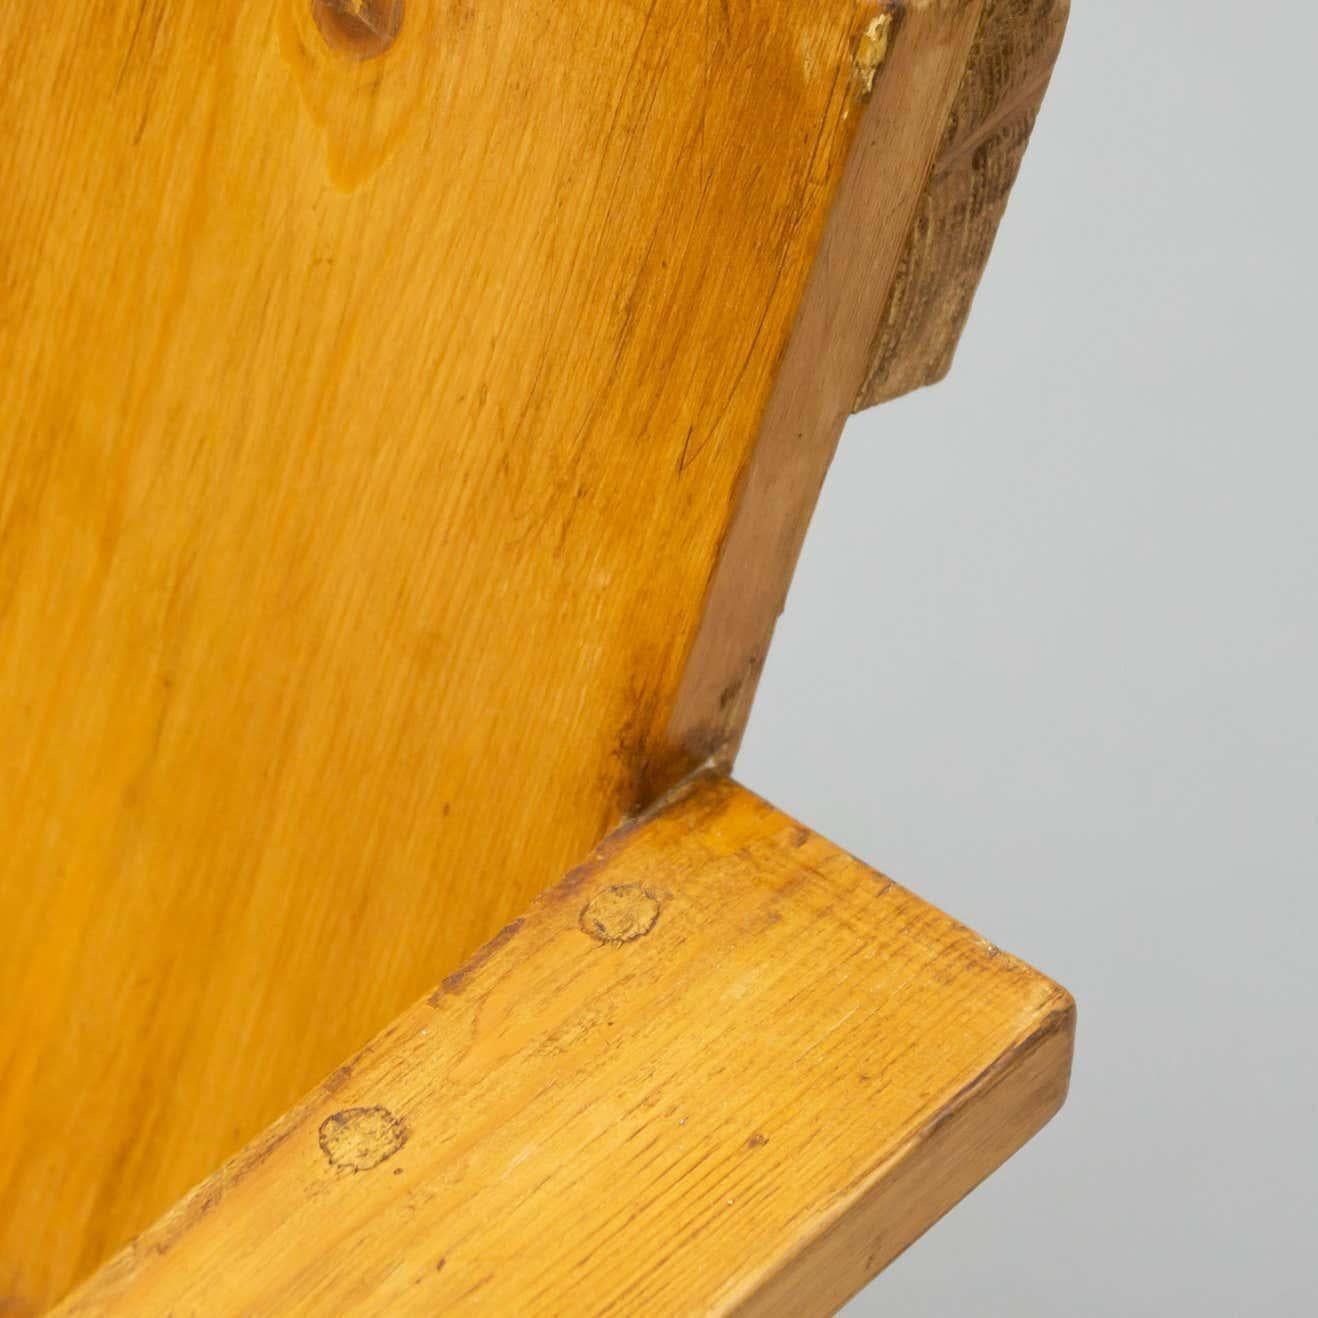 Gerrit Rietveld Mid-Century Modern Wood Crate Chair, circa 1950 For Sale 5